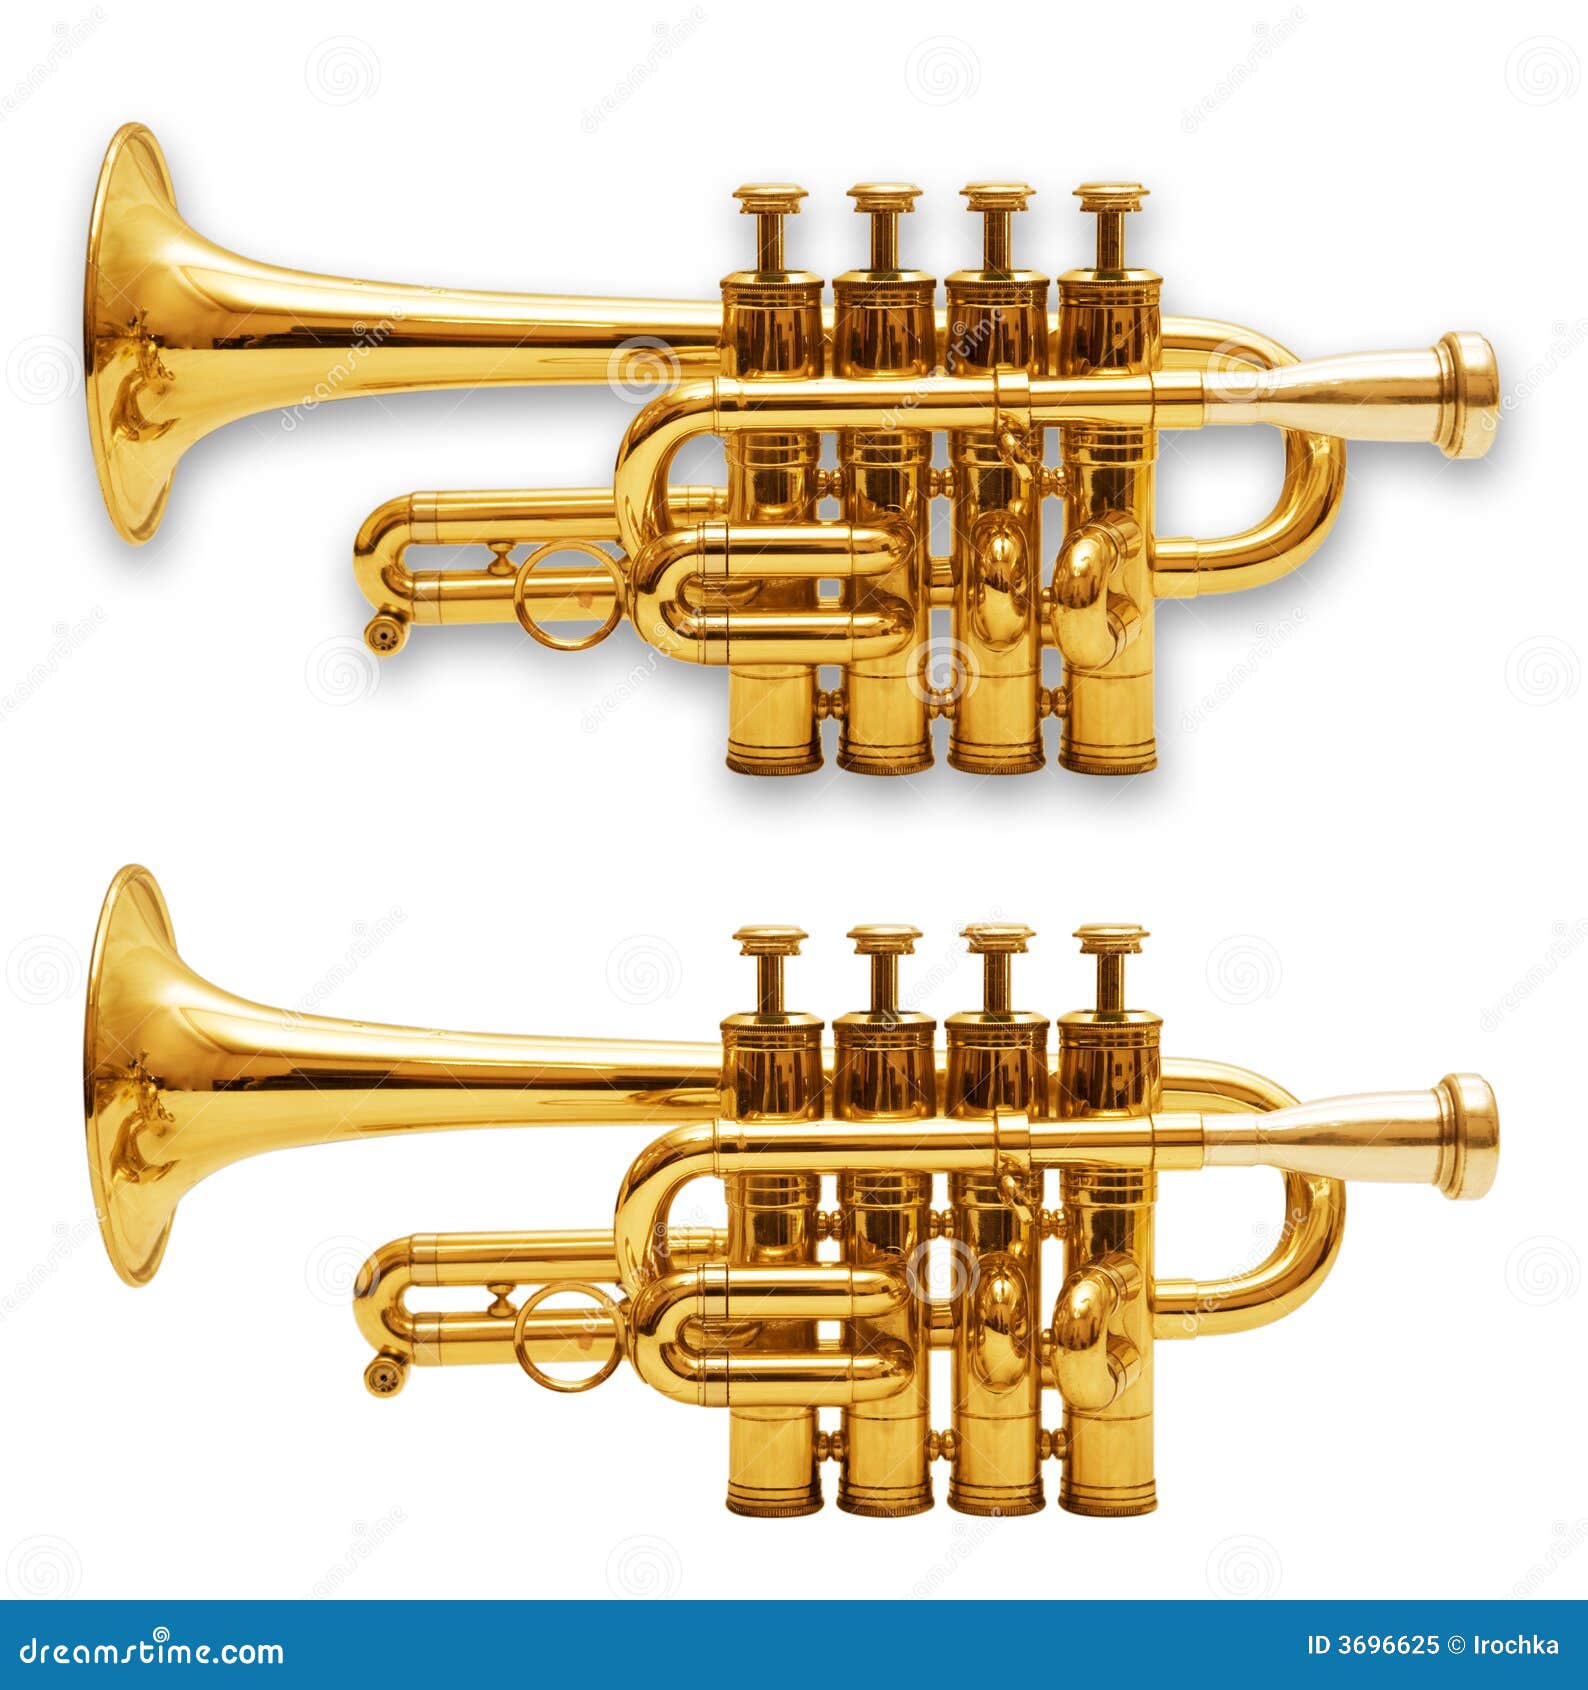 trumpets  on white